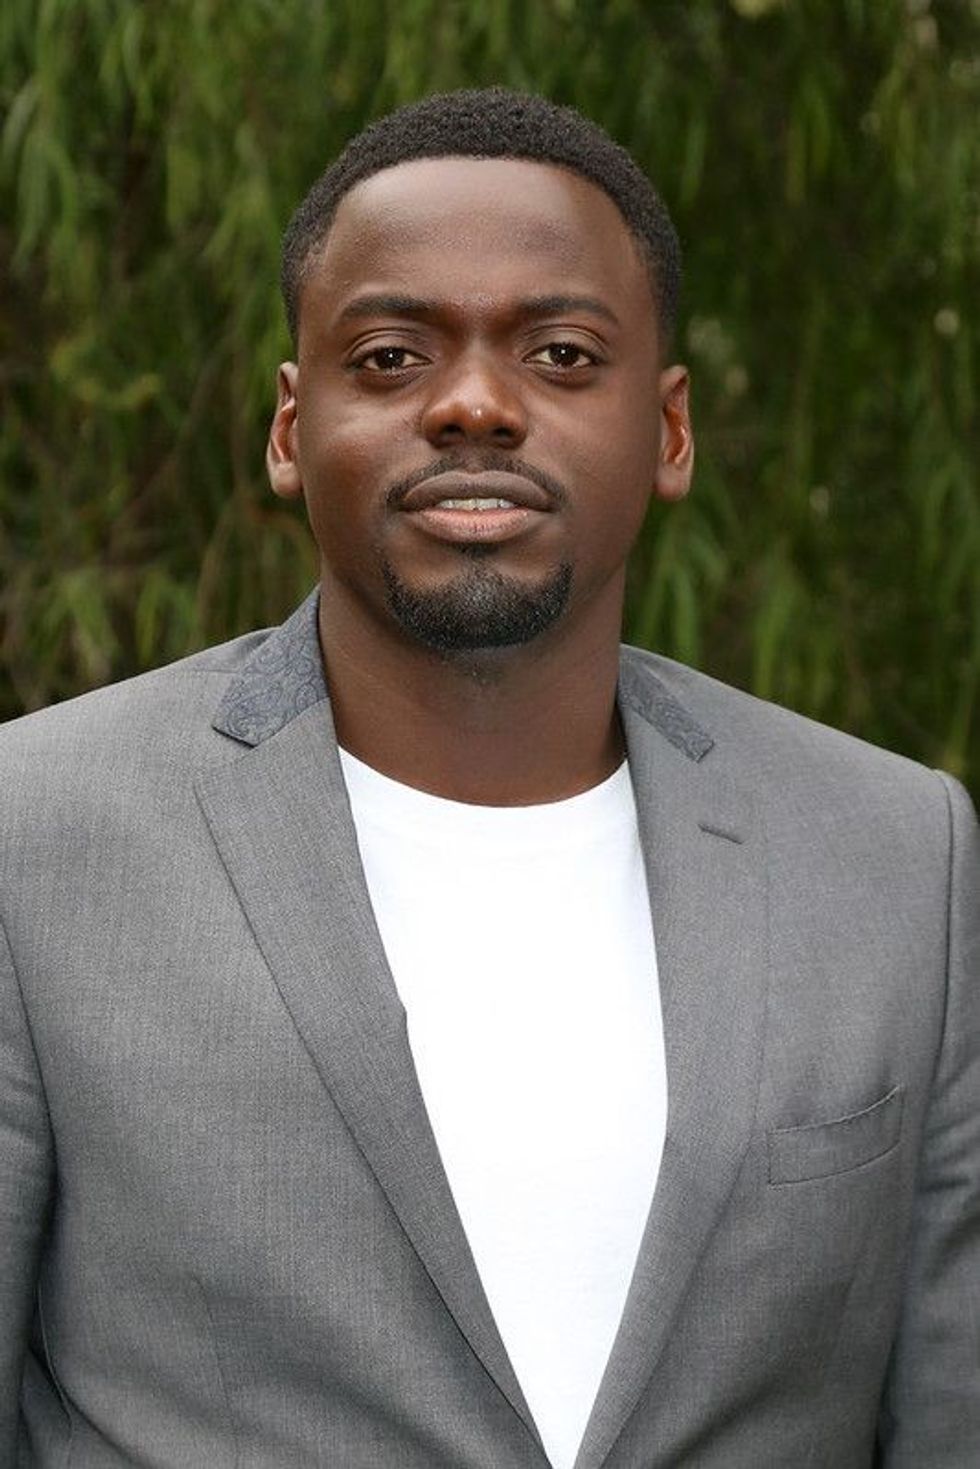 Explore this article to learn important Daniel Kaluuya facts including his age, birthday, and net worth.